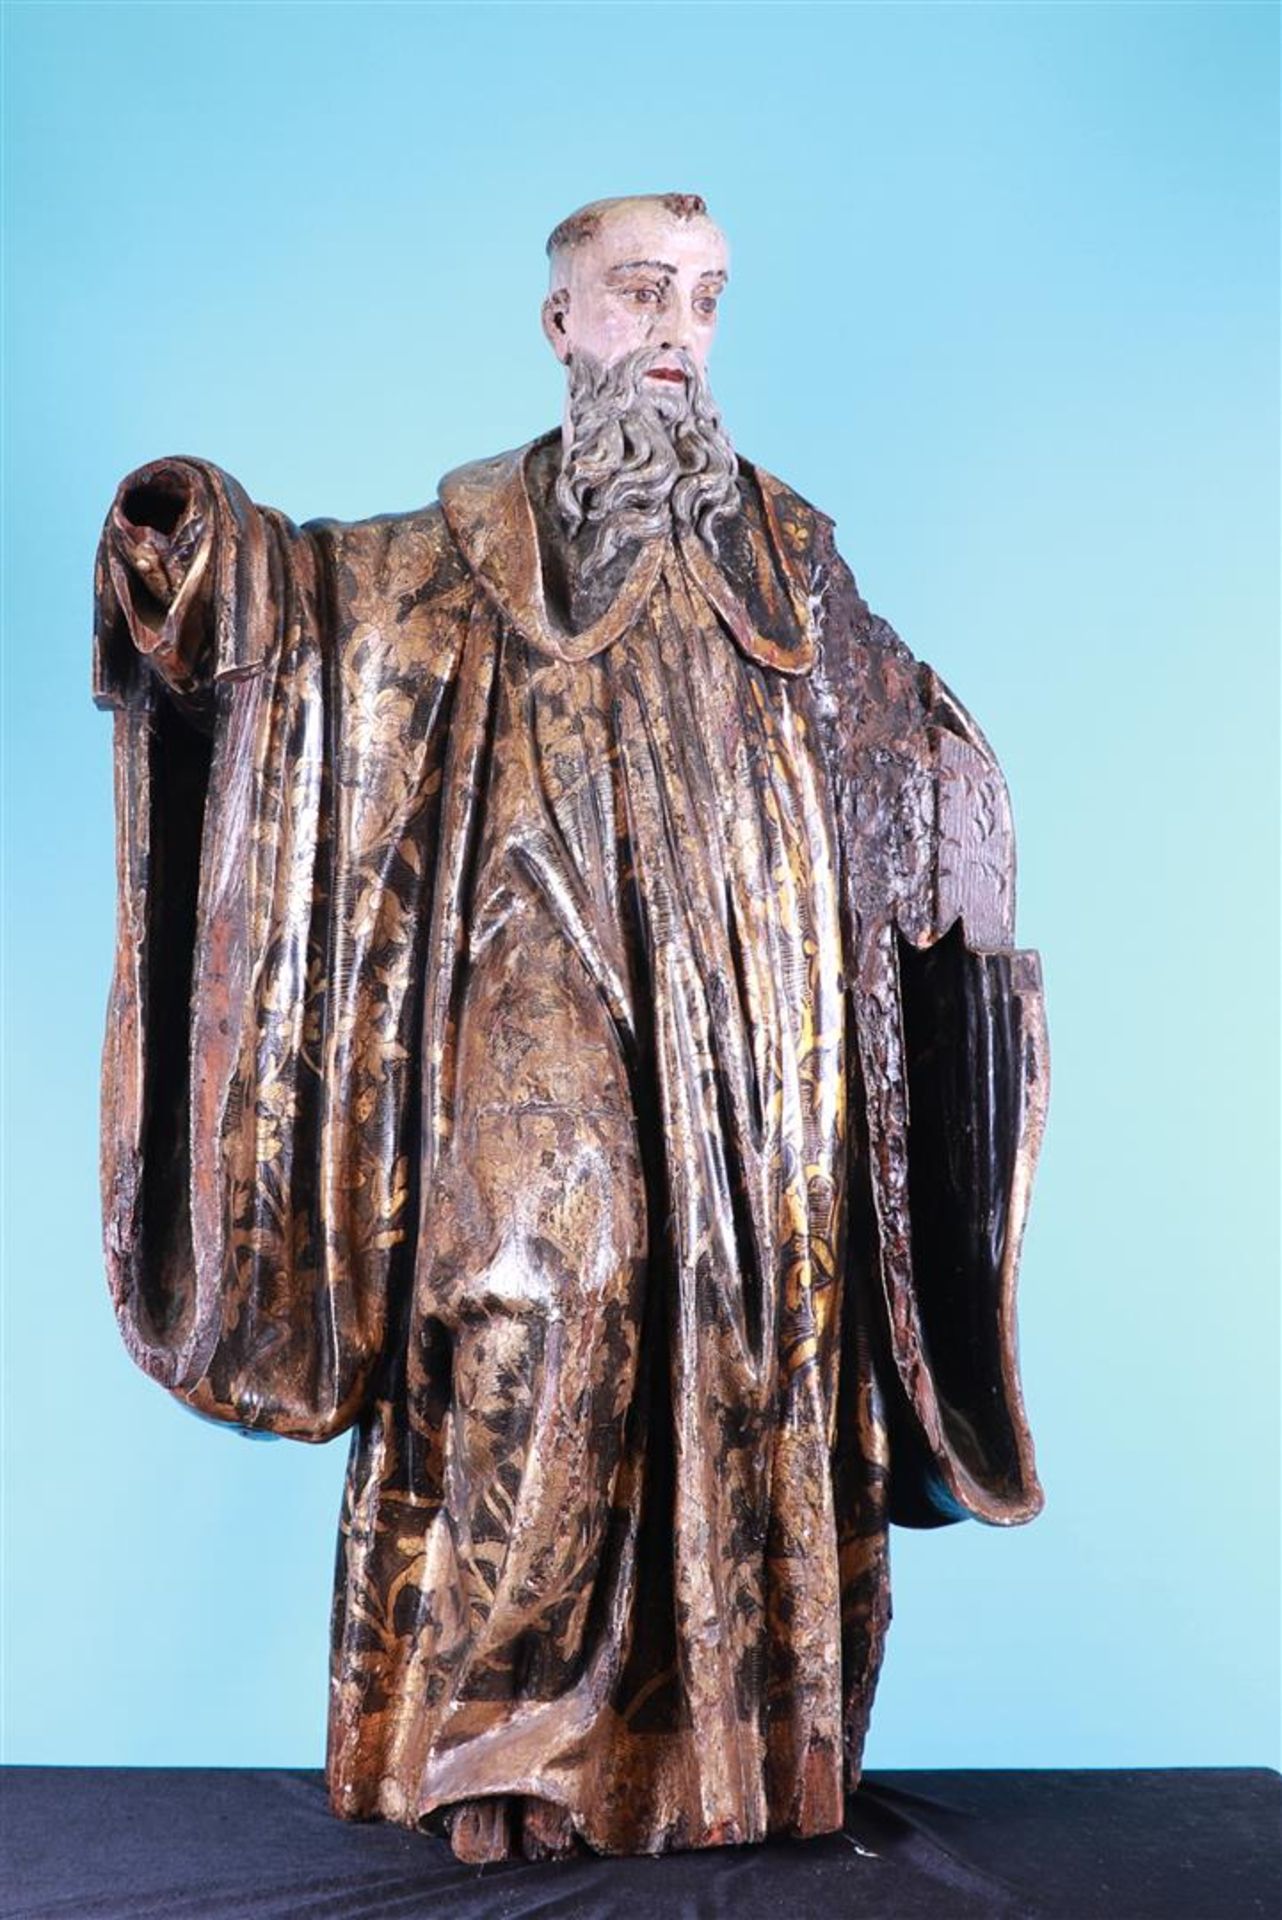 A polychromed and gilded wooden, hollow-carved statue of a Bishop (possibly St. Augustine), ca. 1700